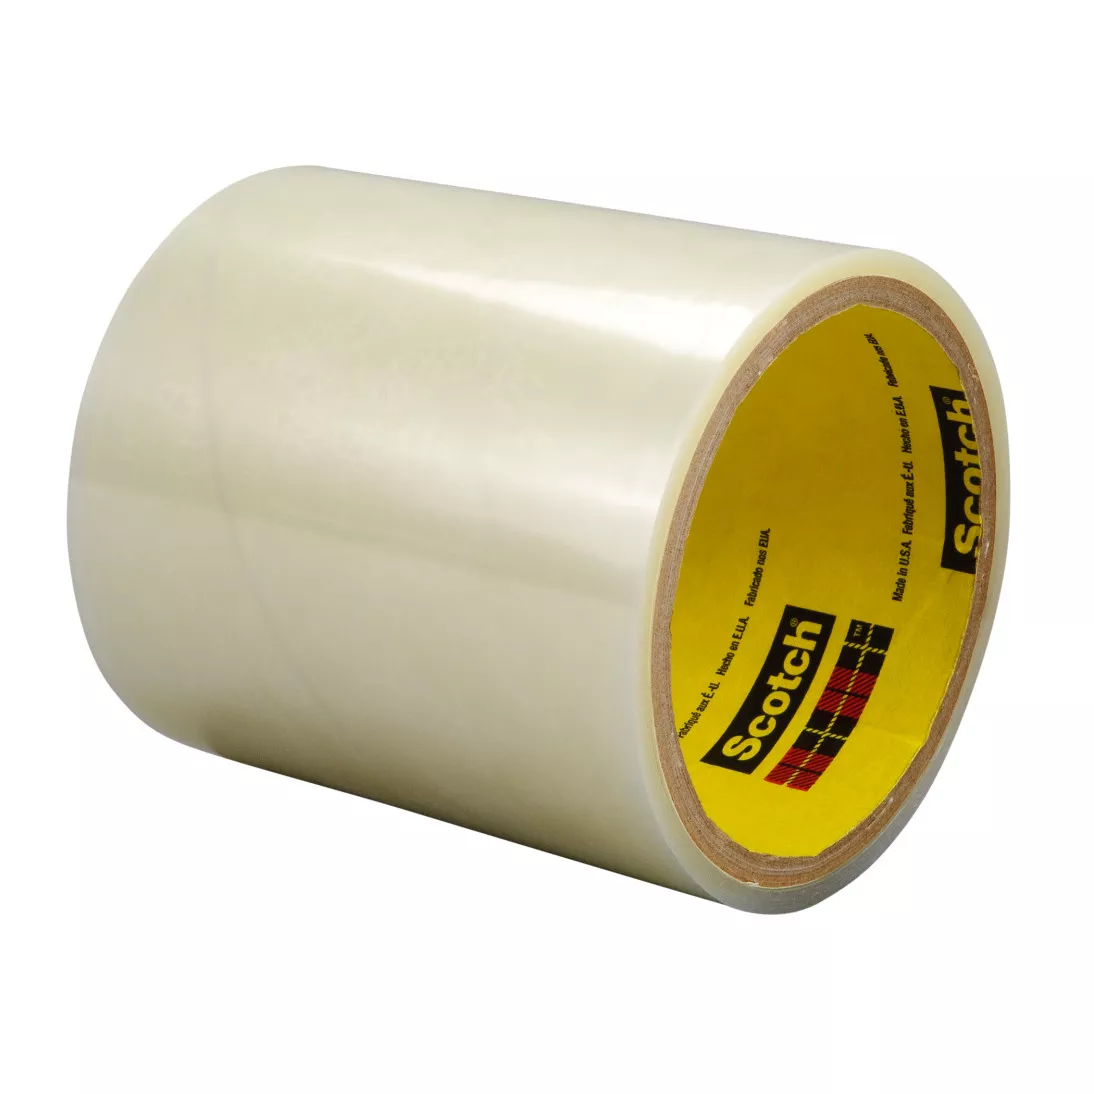 3M™ Double Coated Tape 9628FL, Clear, 54 in x 60 yd, 2 mil, 1 roll per
case